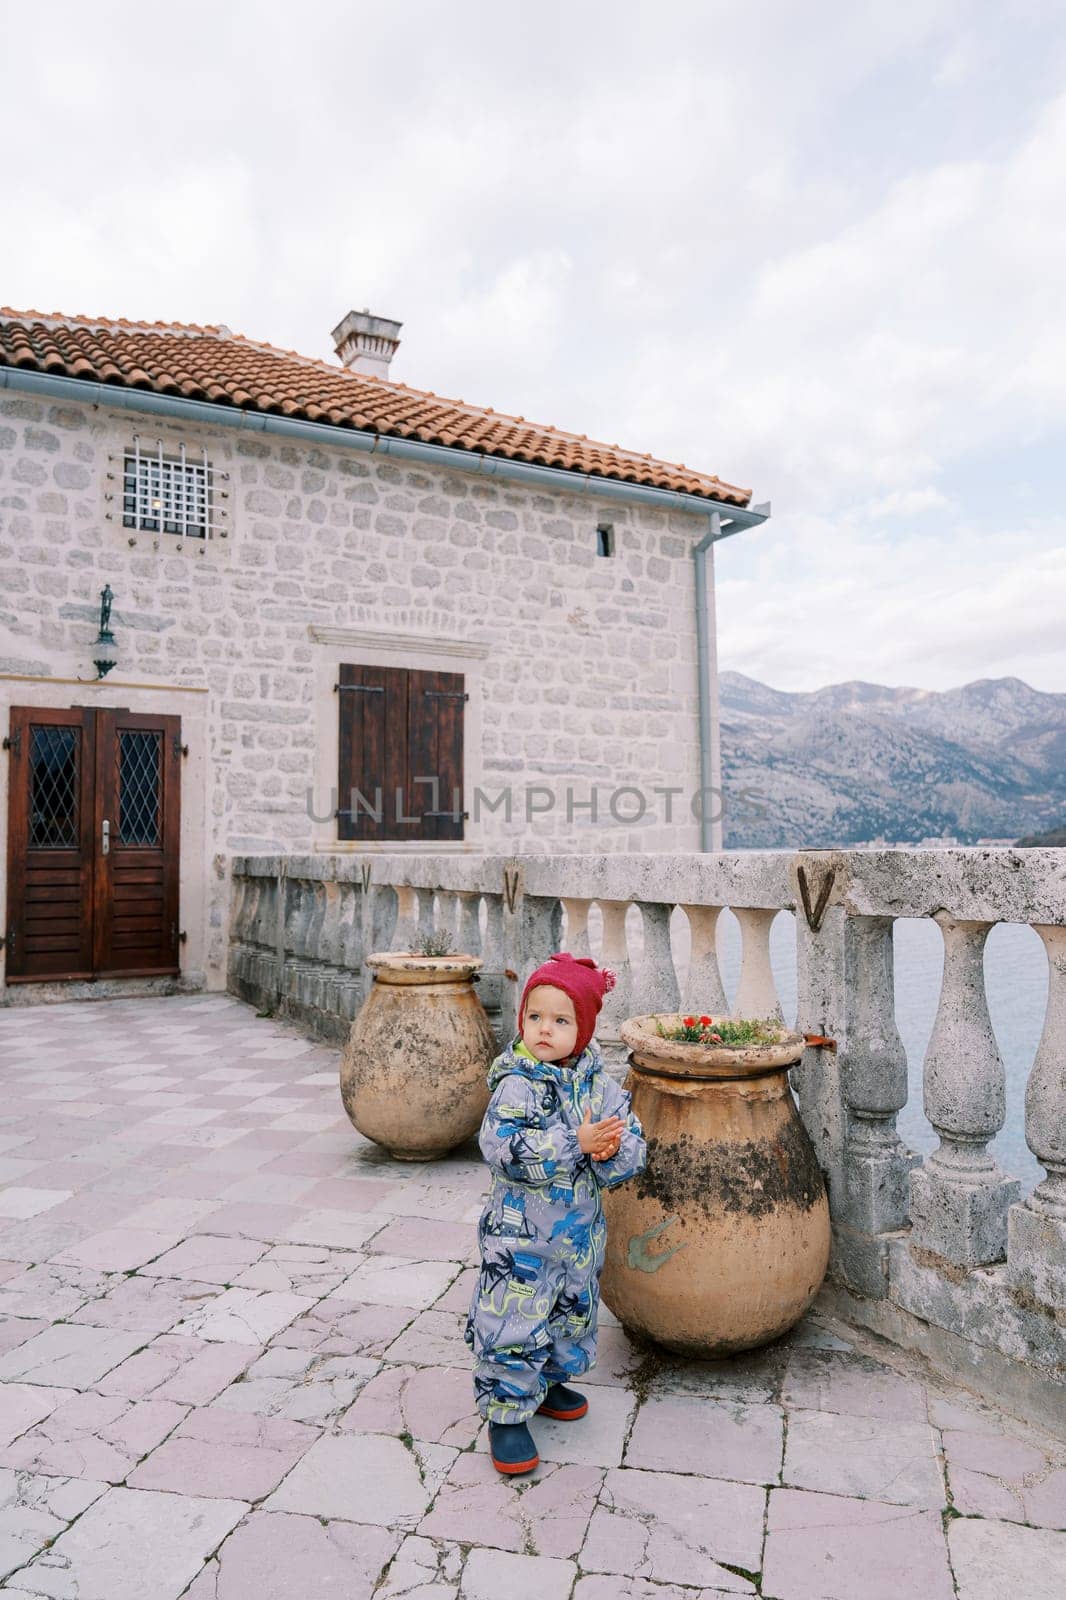 Little girl stands near a clay pot with flowers near a stone balustrade and looks away. High quality photo